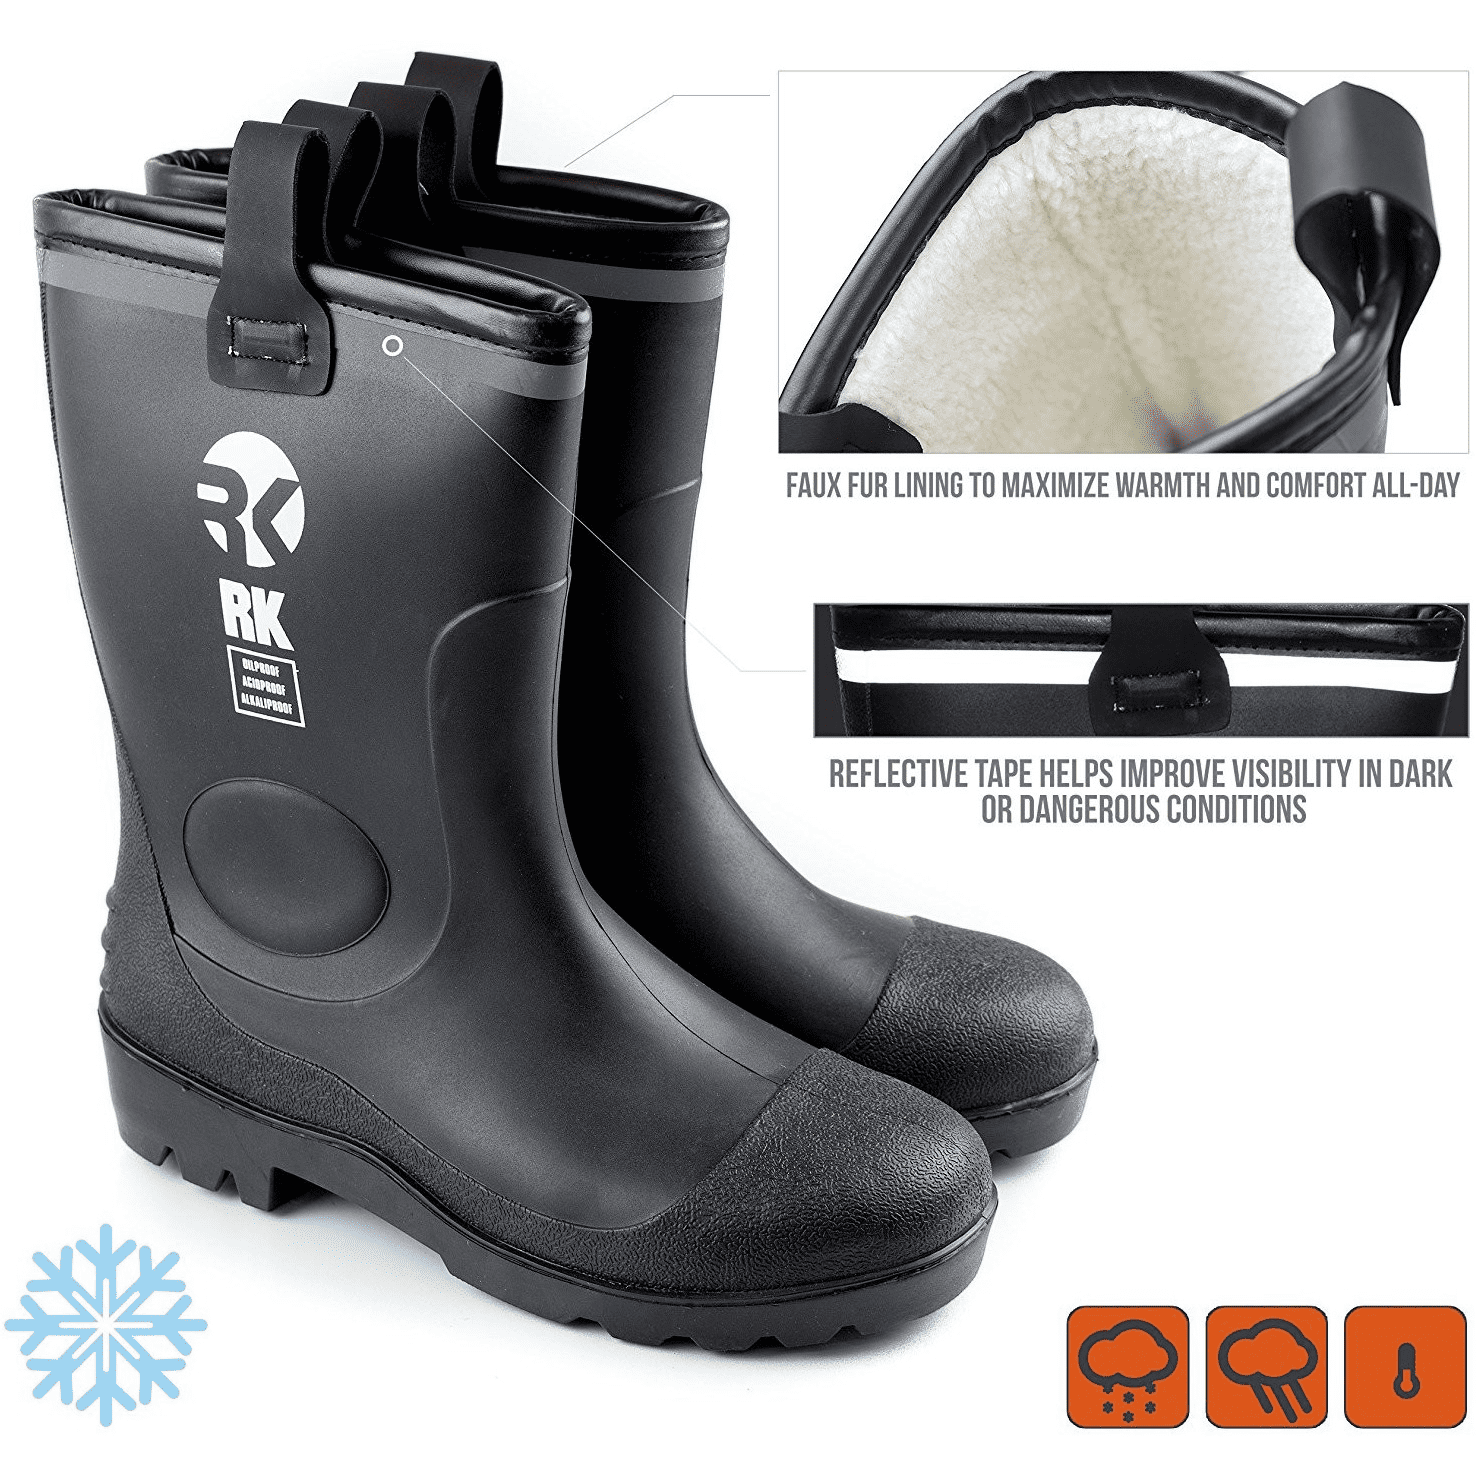 RK Safety - RK Men&amp;#39;s Insulated Waterproof Fur Interior Rubber Sole Winter Snow Cold Weather Rain Boots - 13 D(M) US